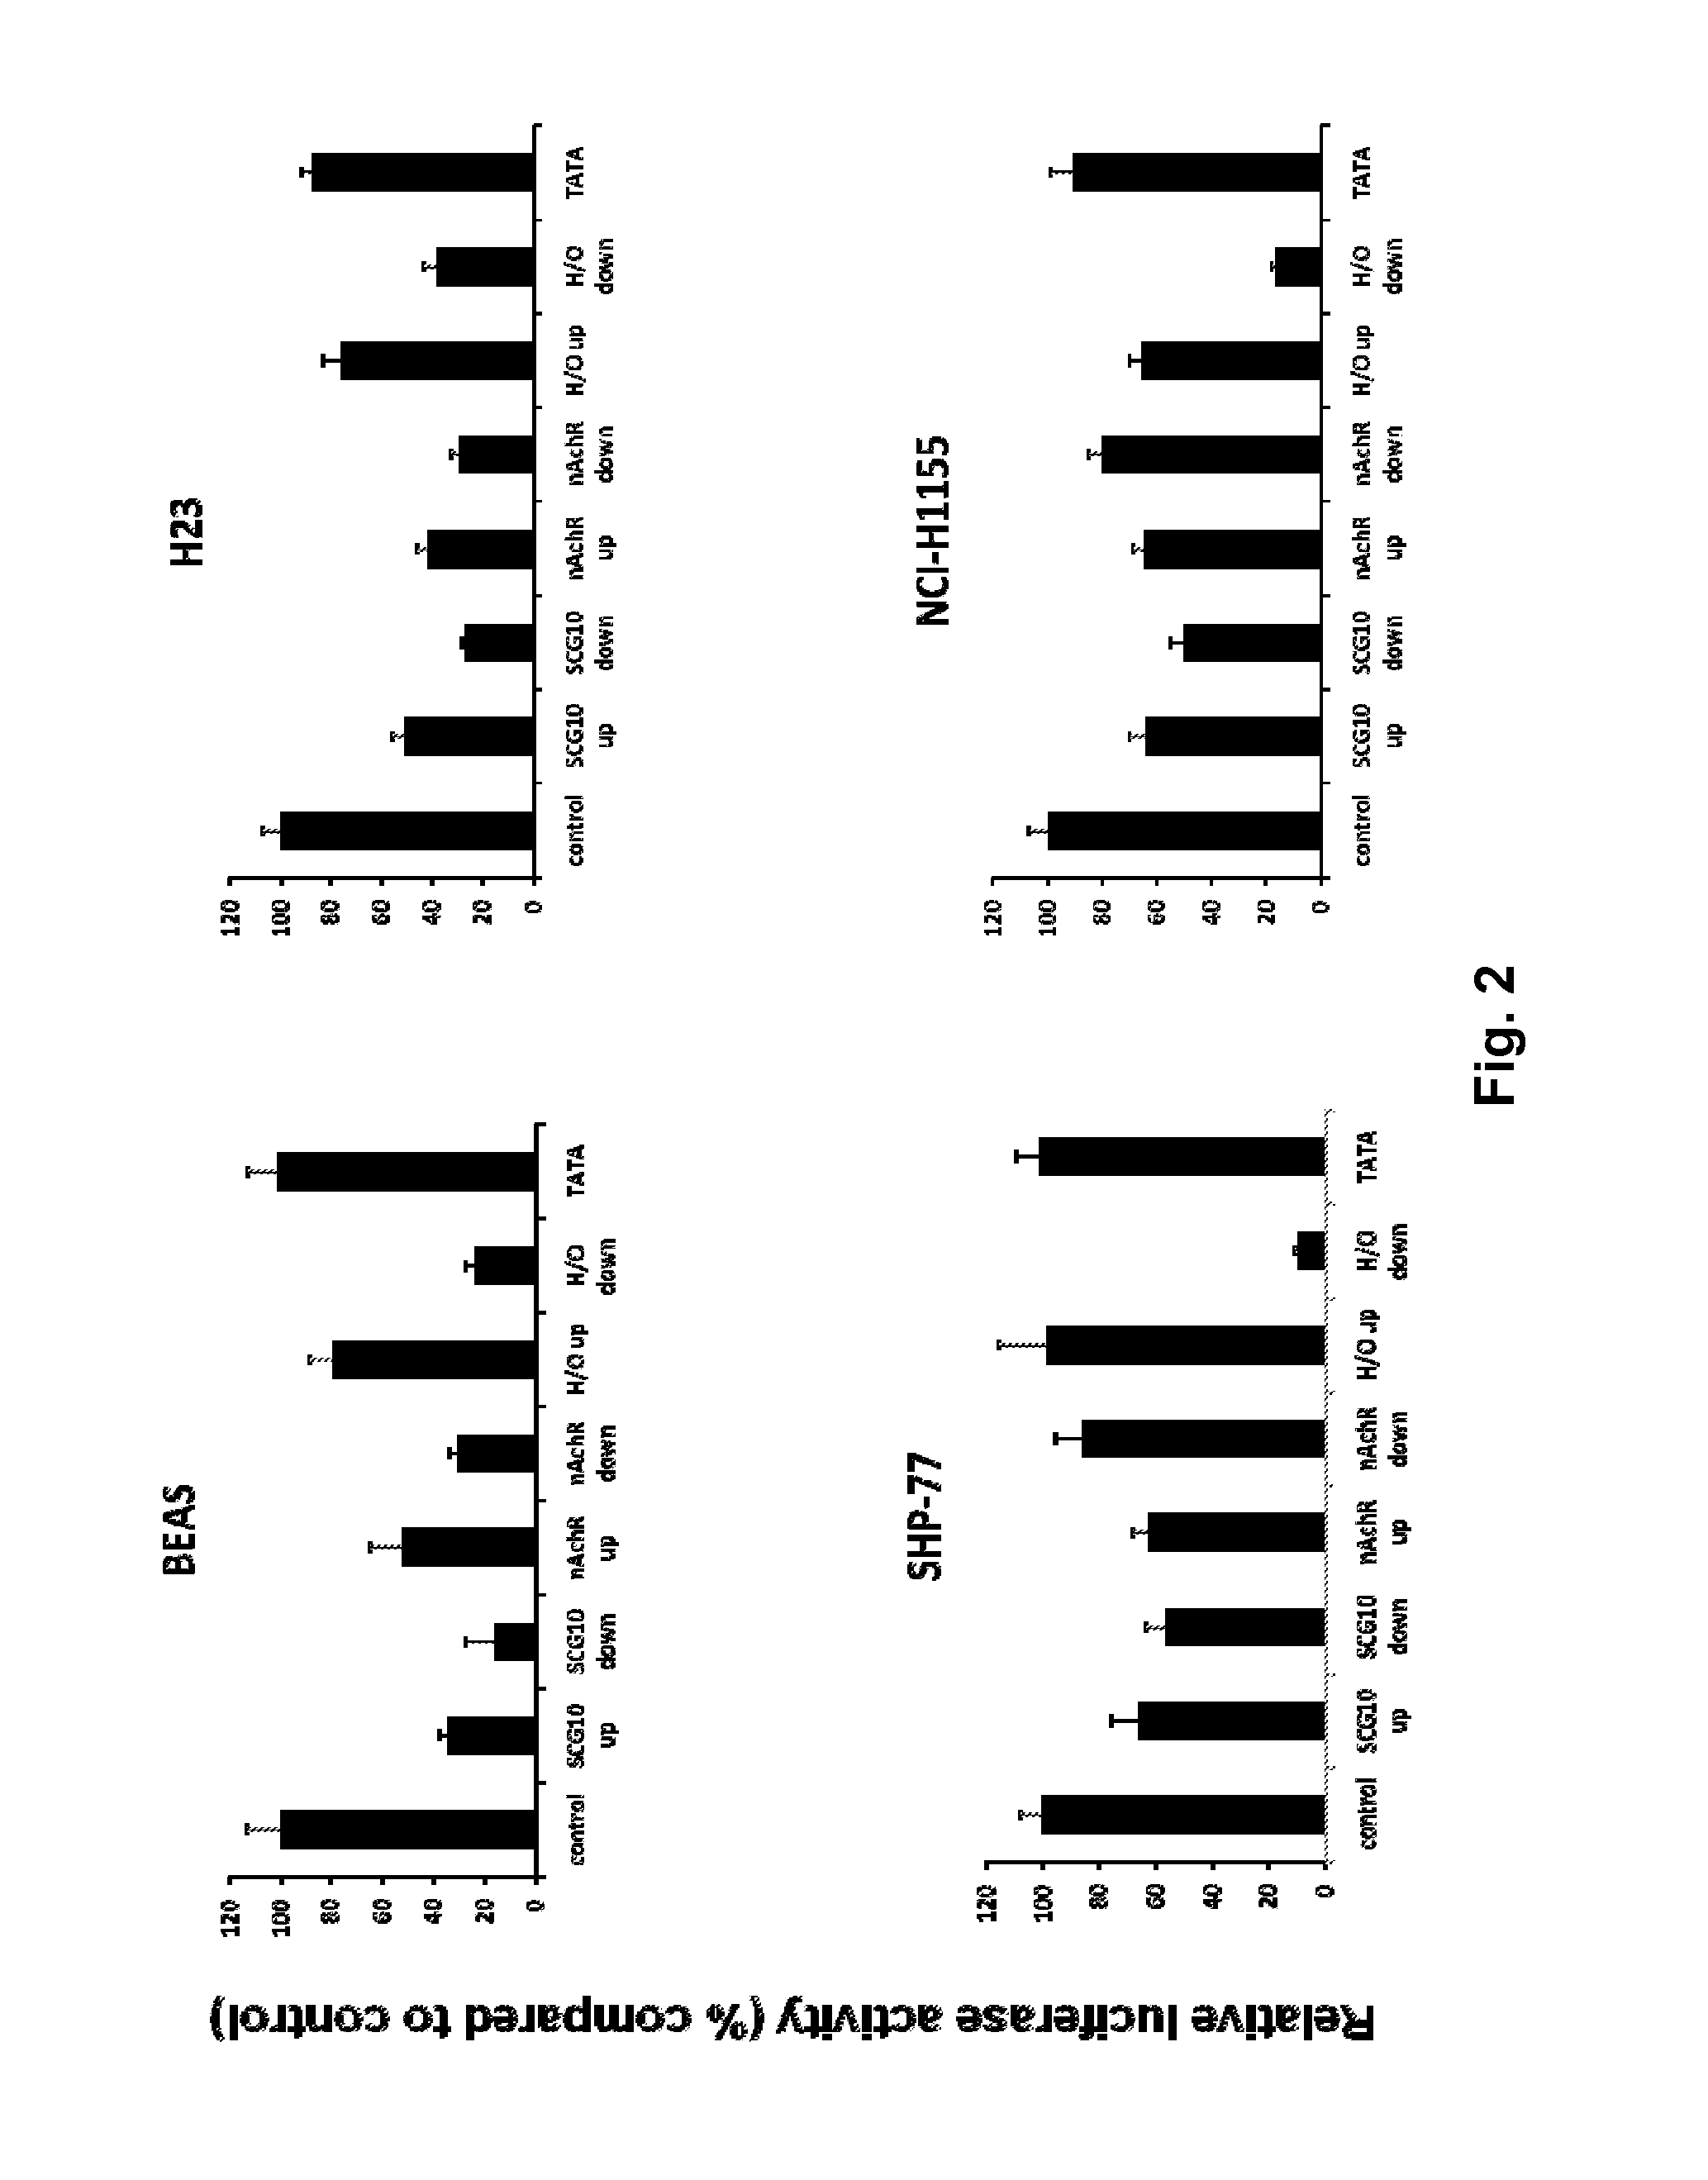 Modified INSM1-Promoter for Neuroendocrine Tumor Therapy and Diagnostics